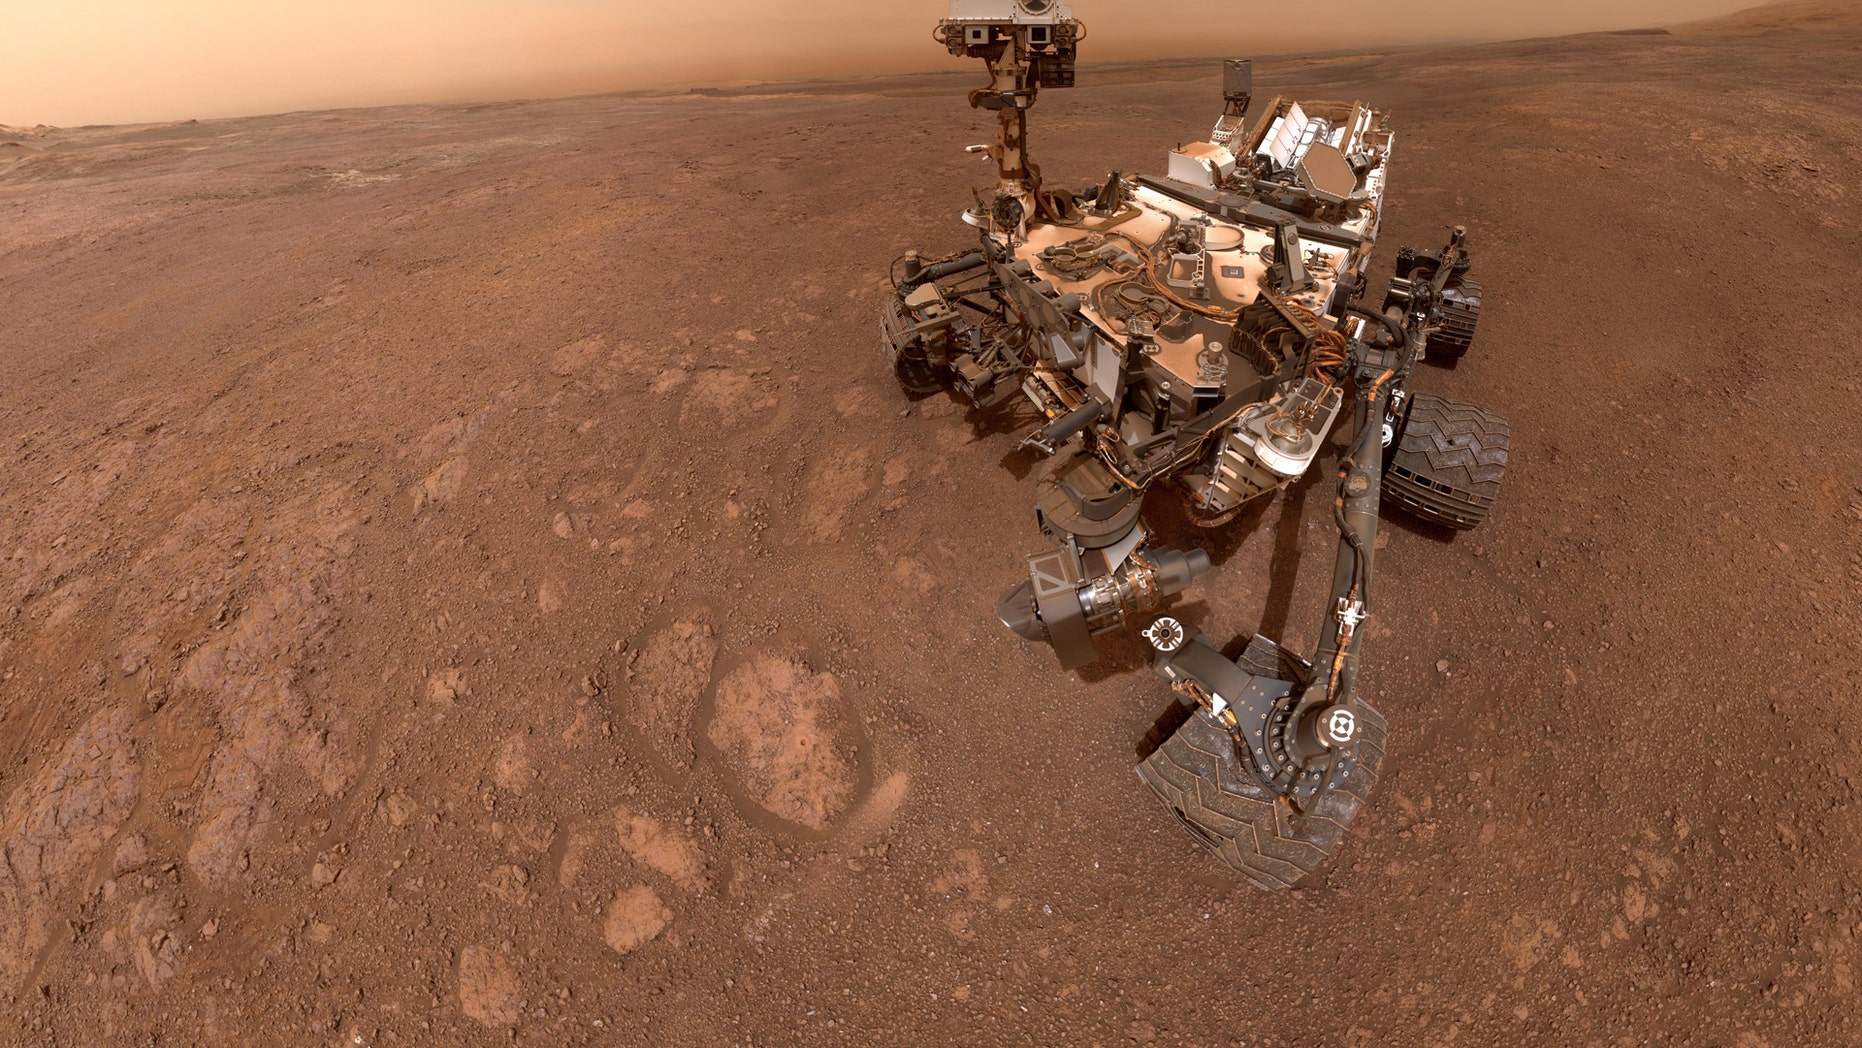 NASA’s Curiosity Mars rover snaps stunning selfie, starts new adventure on the Red Planet